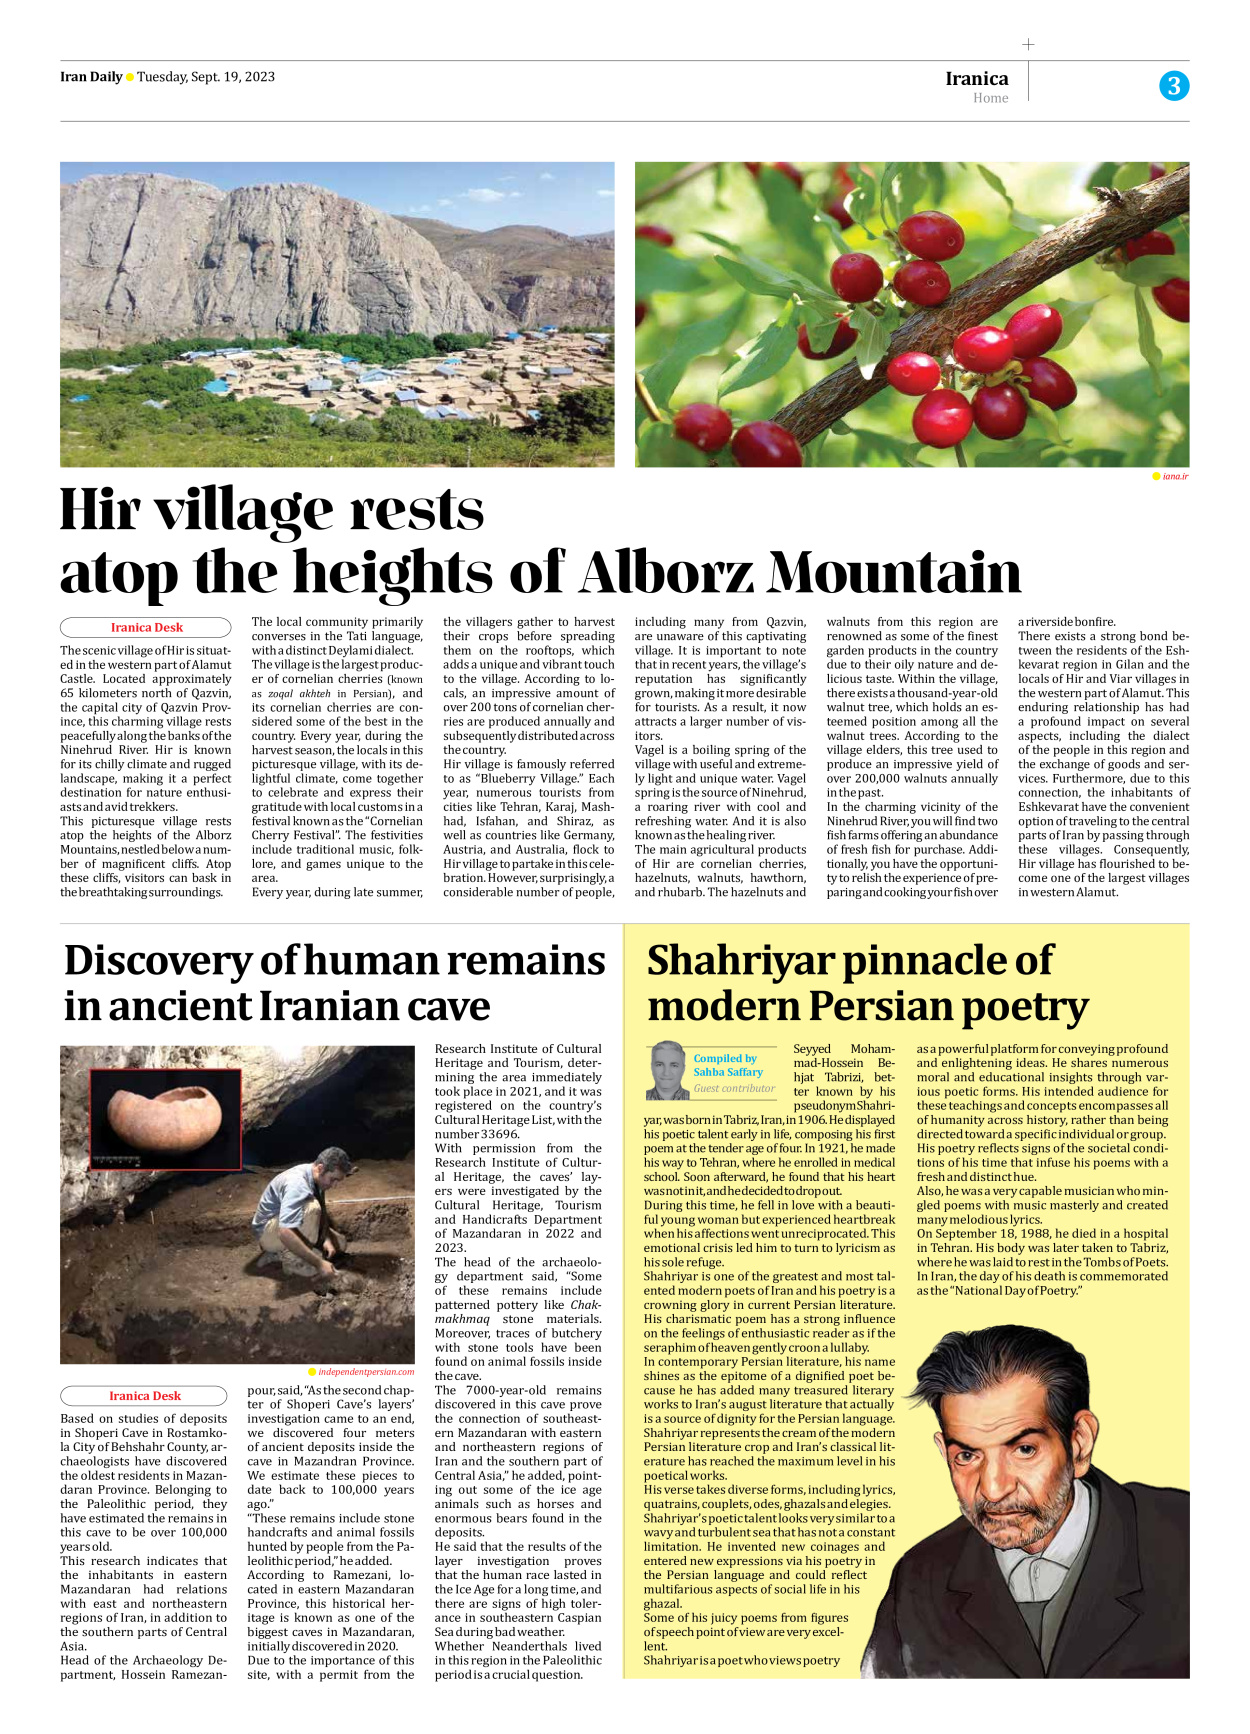 Iran Daily - Number Seven Thousand Three Hundred and Eighty Nine - 19 September 2023 - Page 3